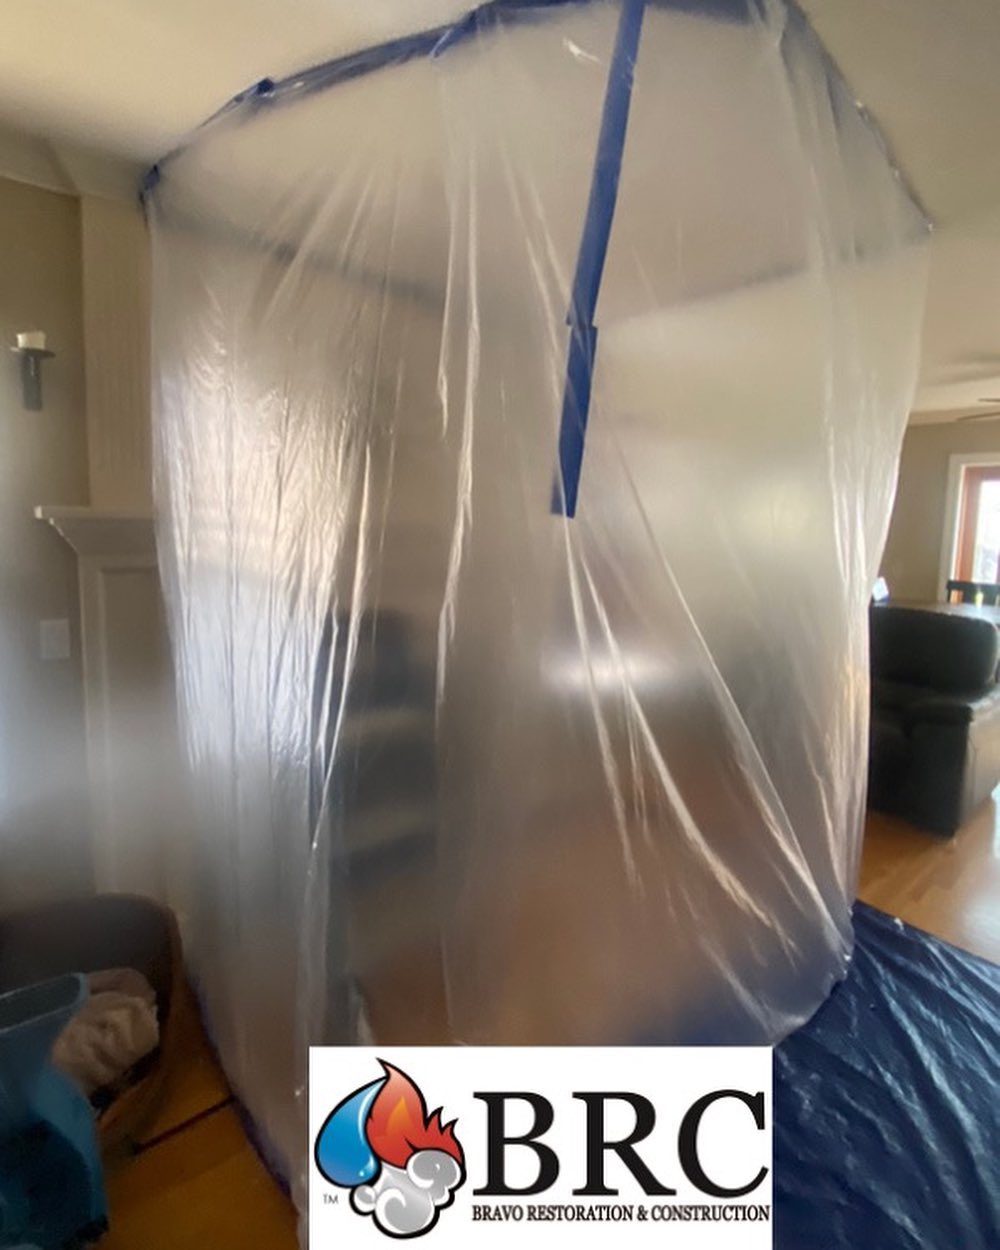 Temporary plastic containment unit set up in a home for construction or restoration, with the logo of bravo restoration & construction visible.